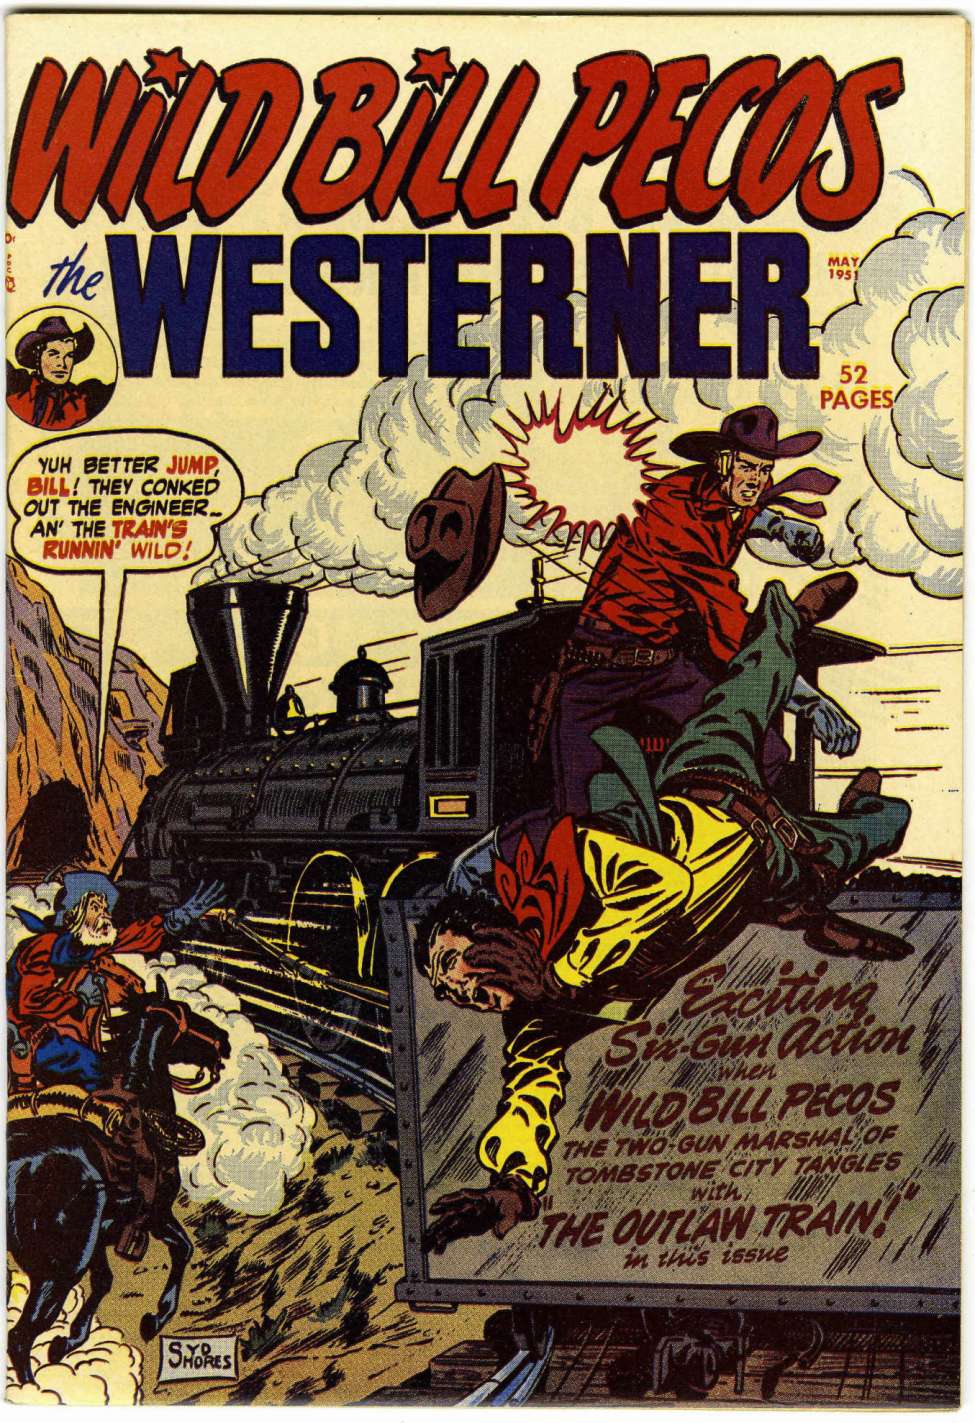 Book Cover For The Westerner 36